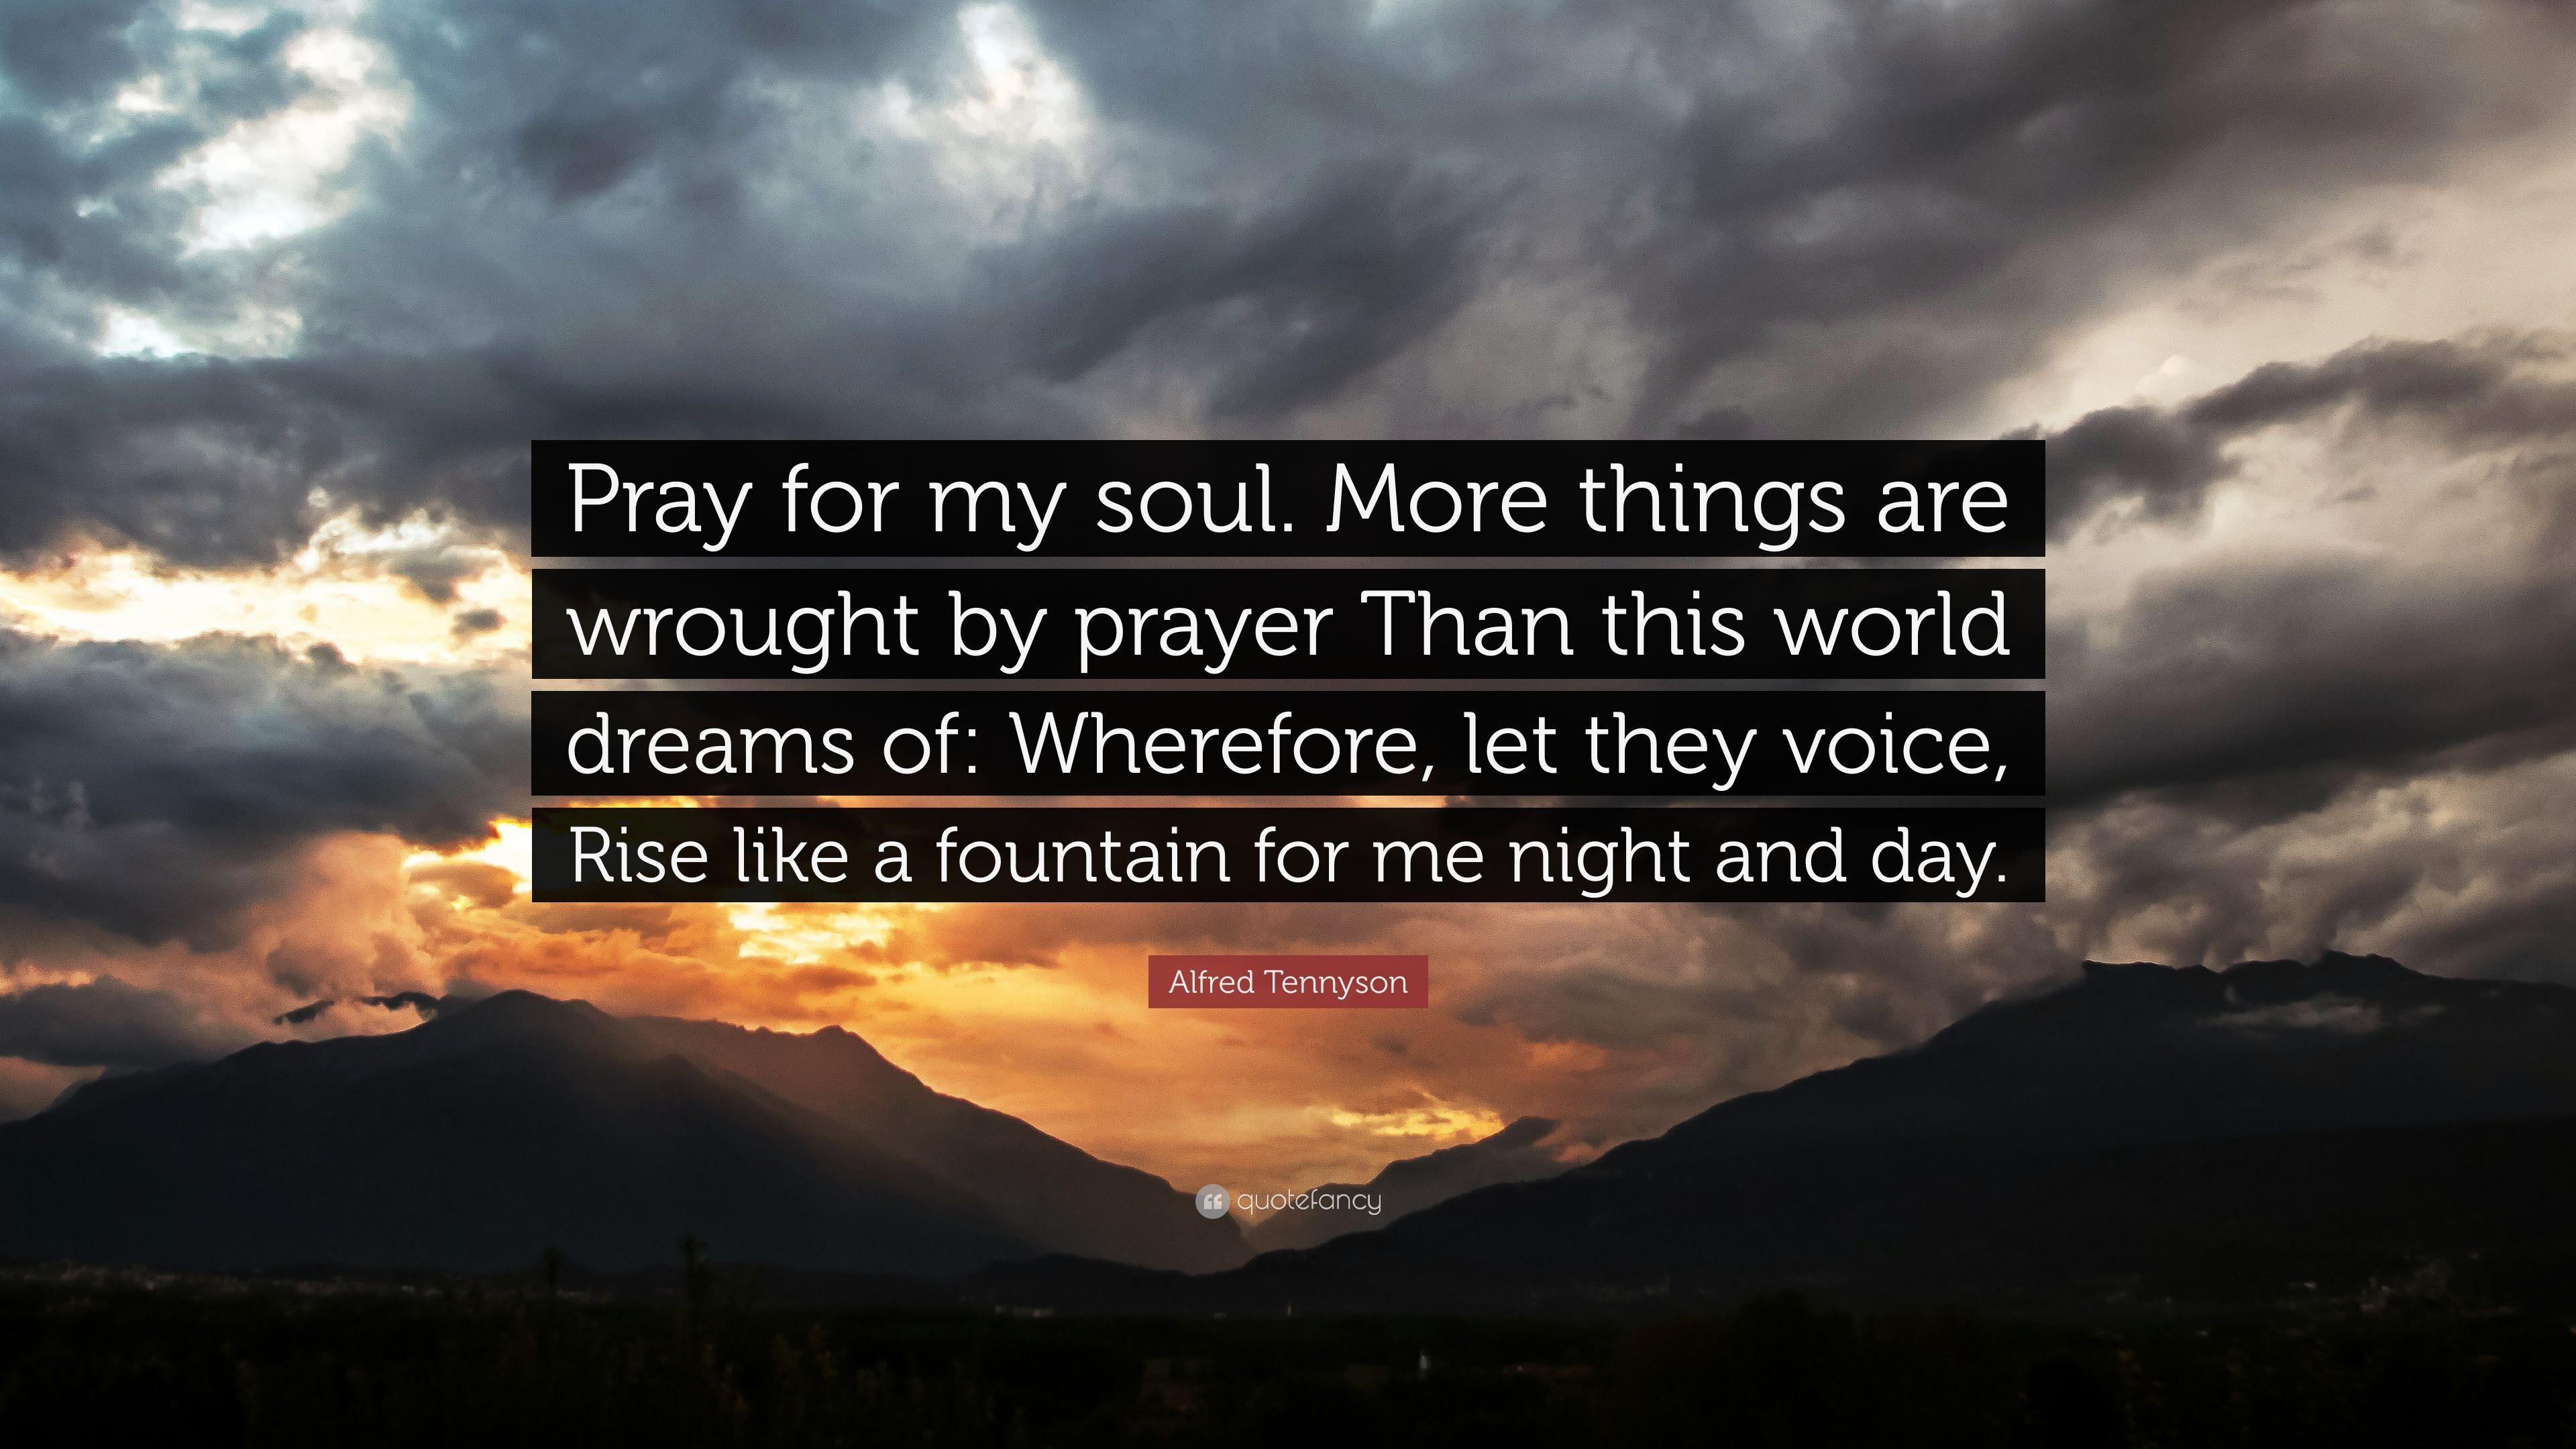 Alfred Tennyson Quote: “Pray for my soul. More things are wrought